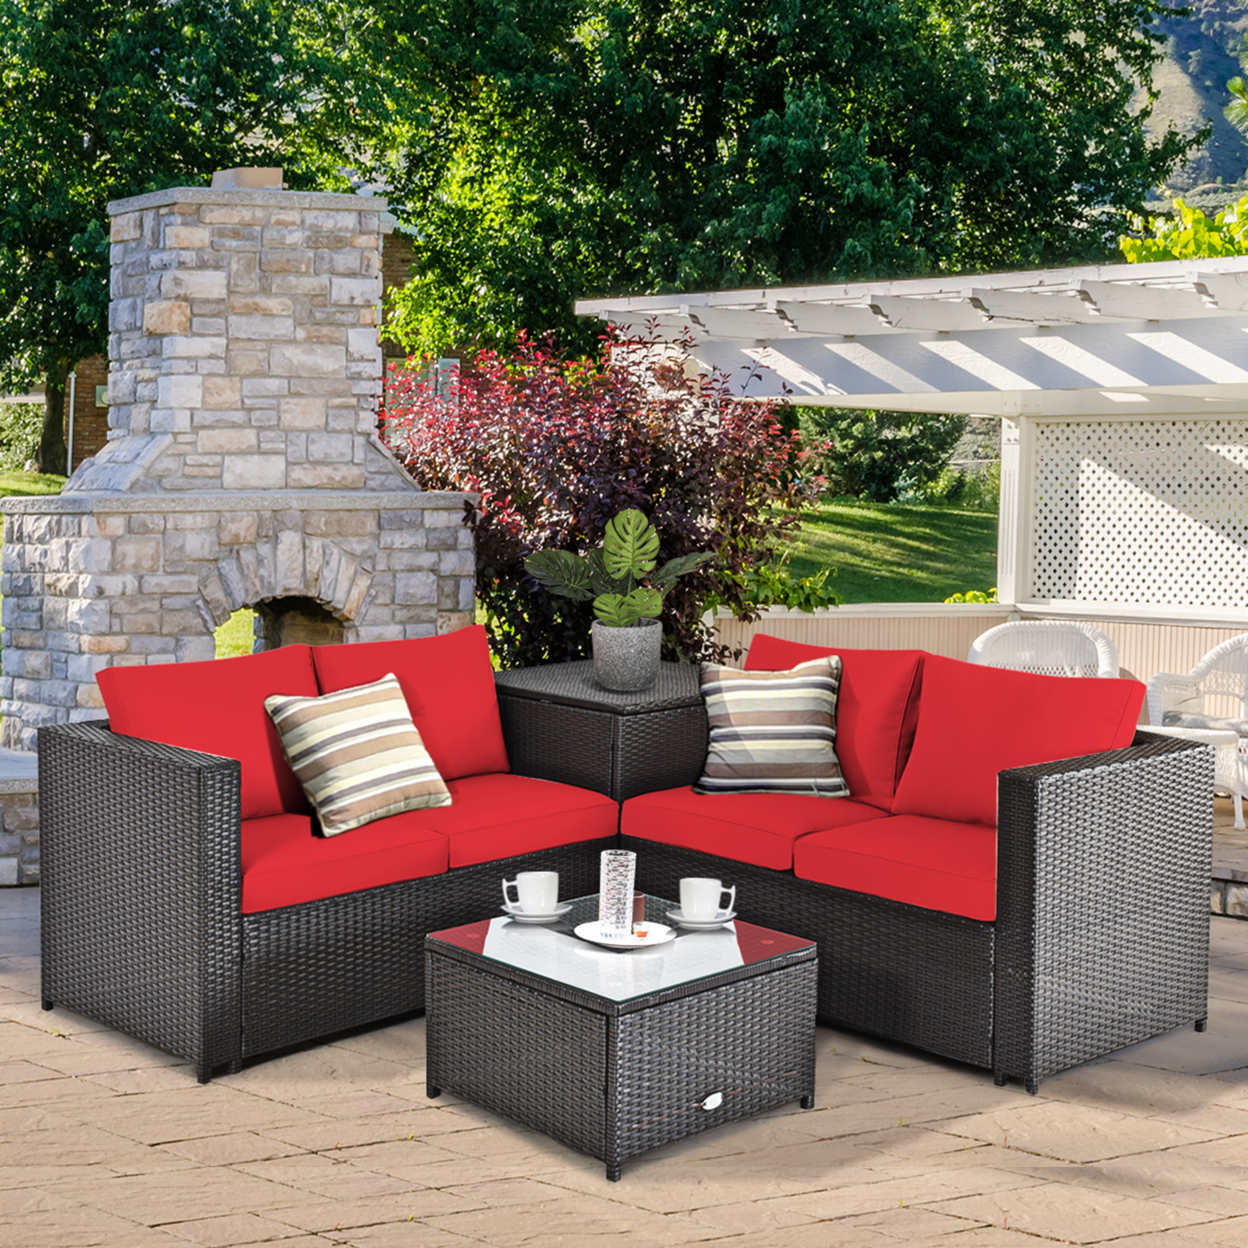 4PCS Cushioned Rattan Patio Conversation Set W/ Side Table Red Cushion